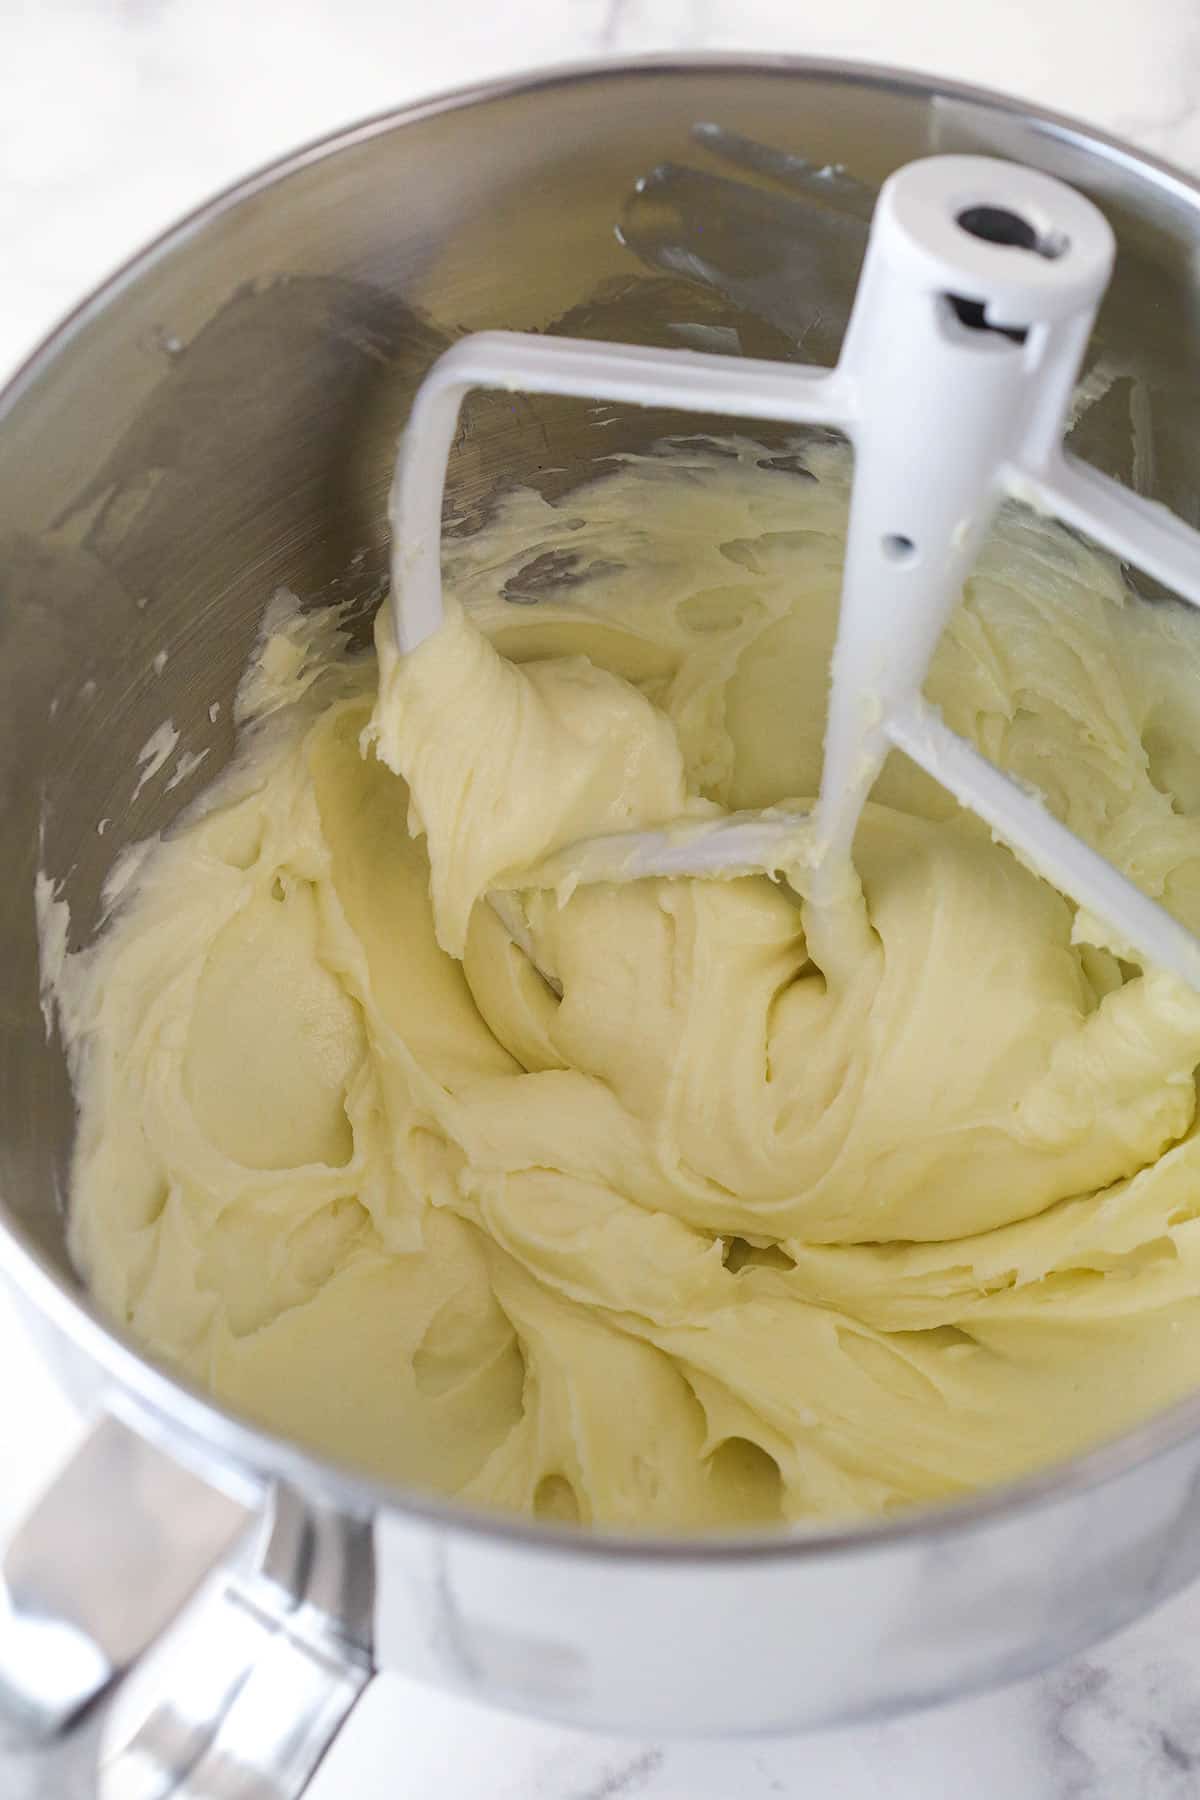 Mixing together cream cheese, sugar, and flour for cheesecake.